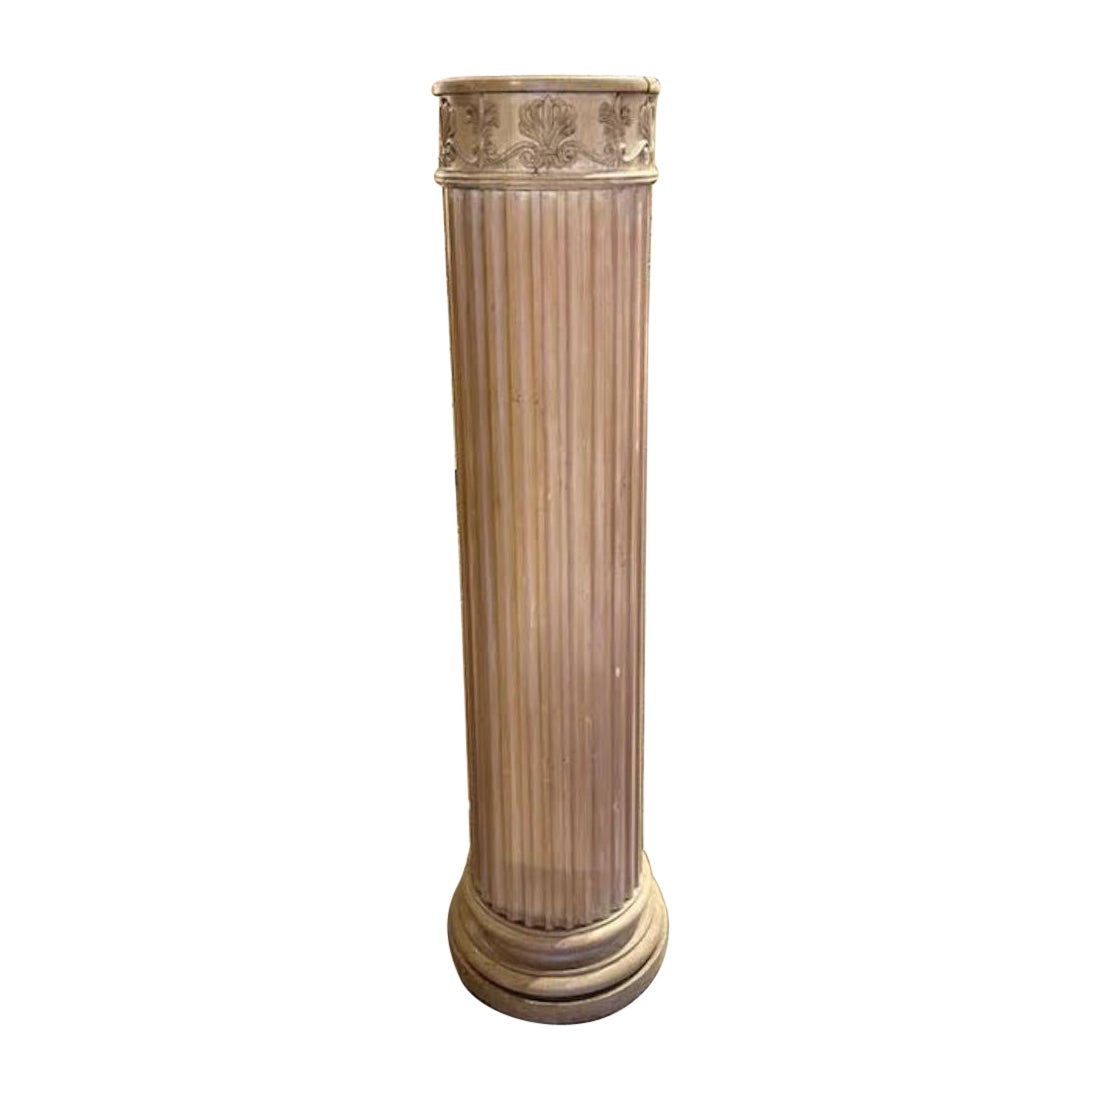 English Planter and Pedestal For Sale